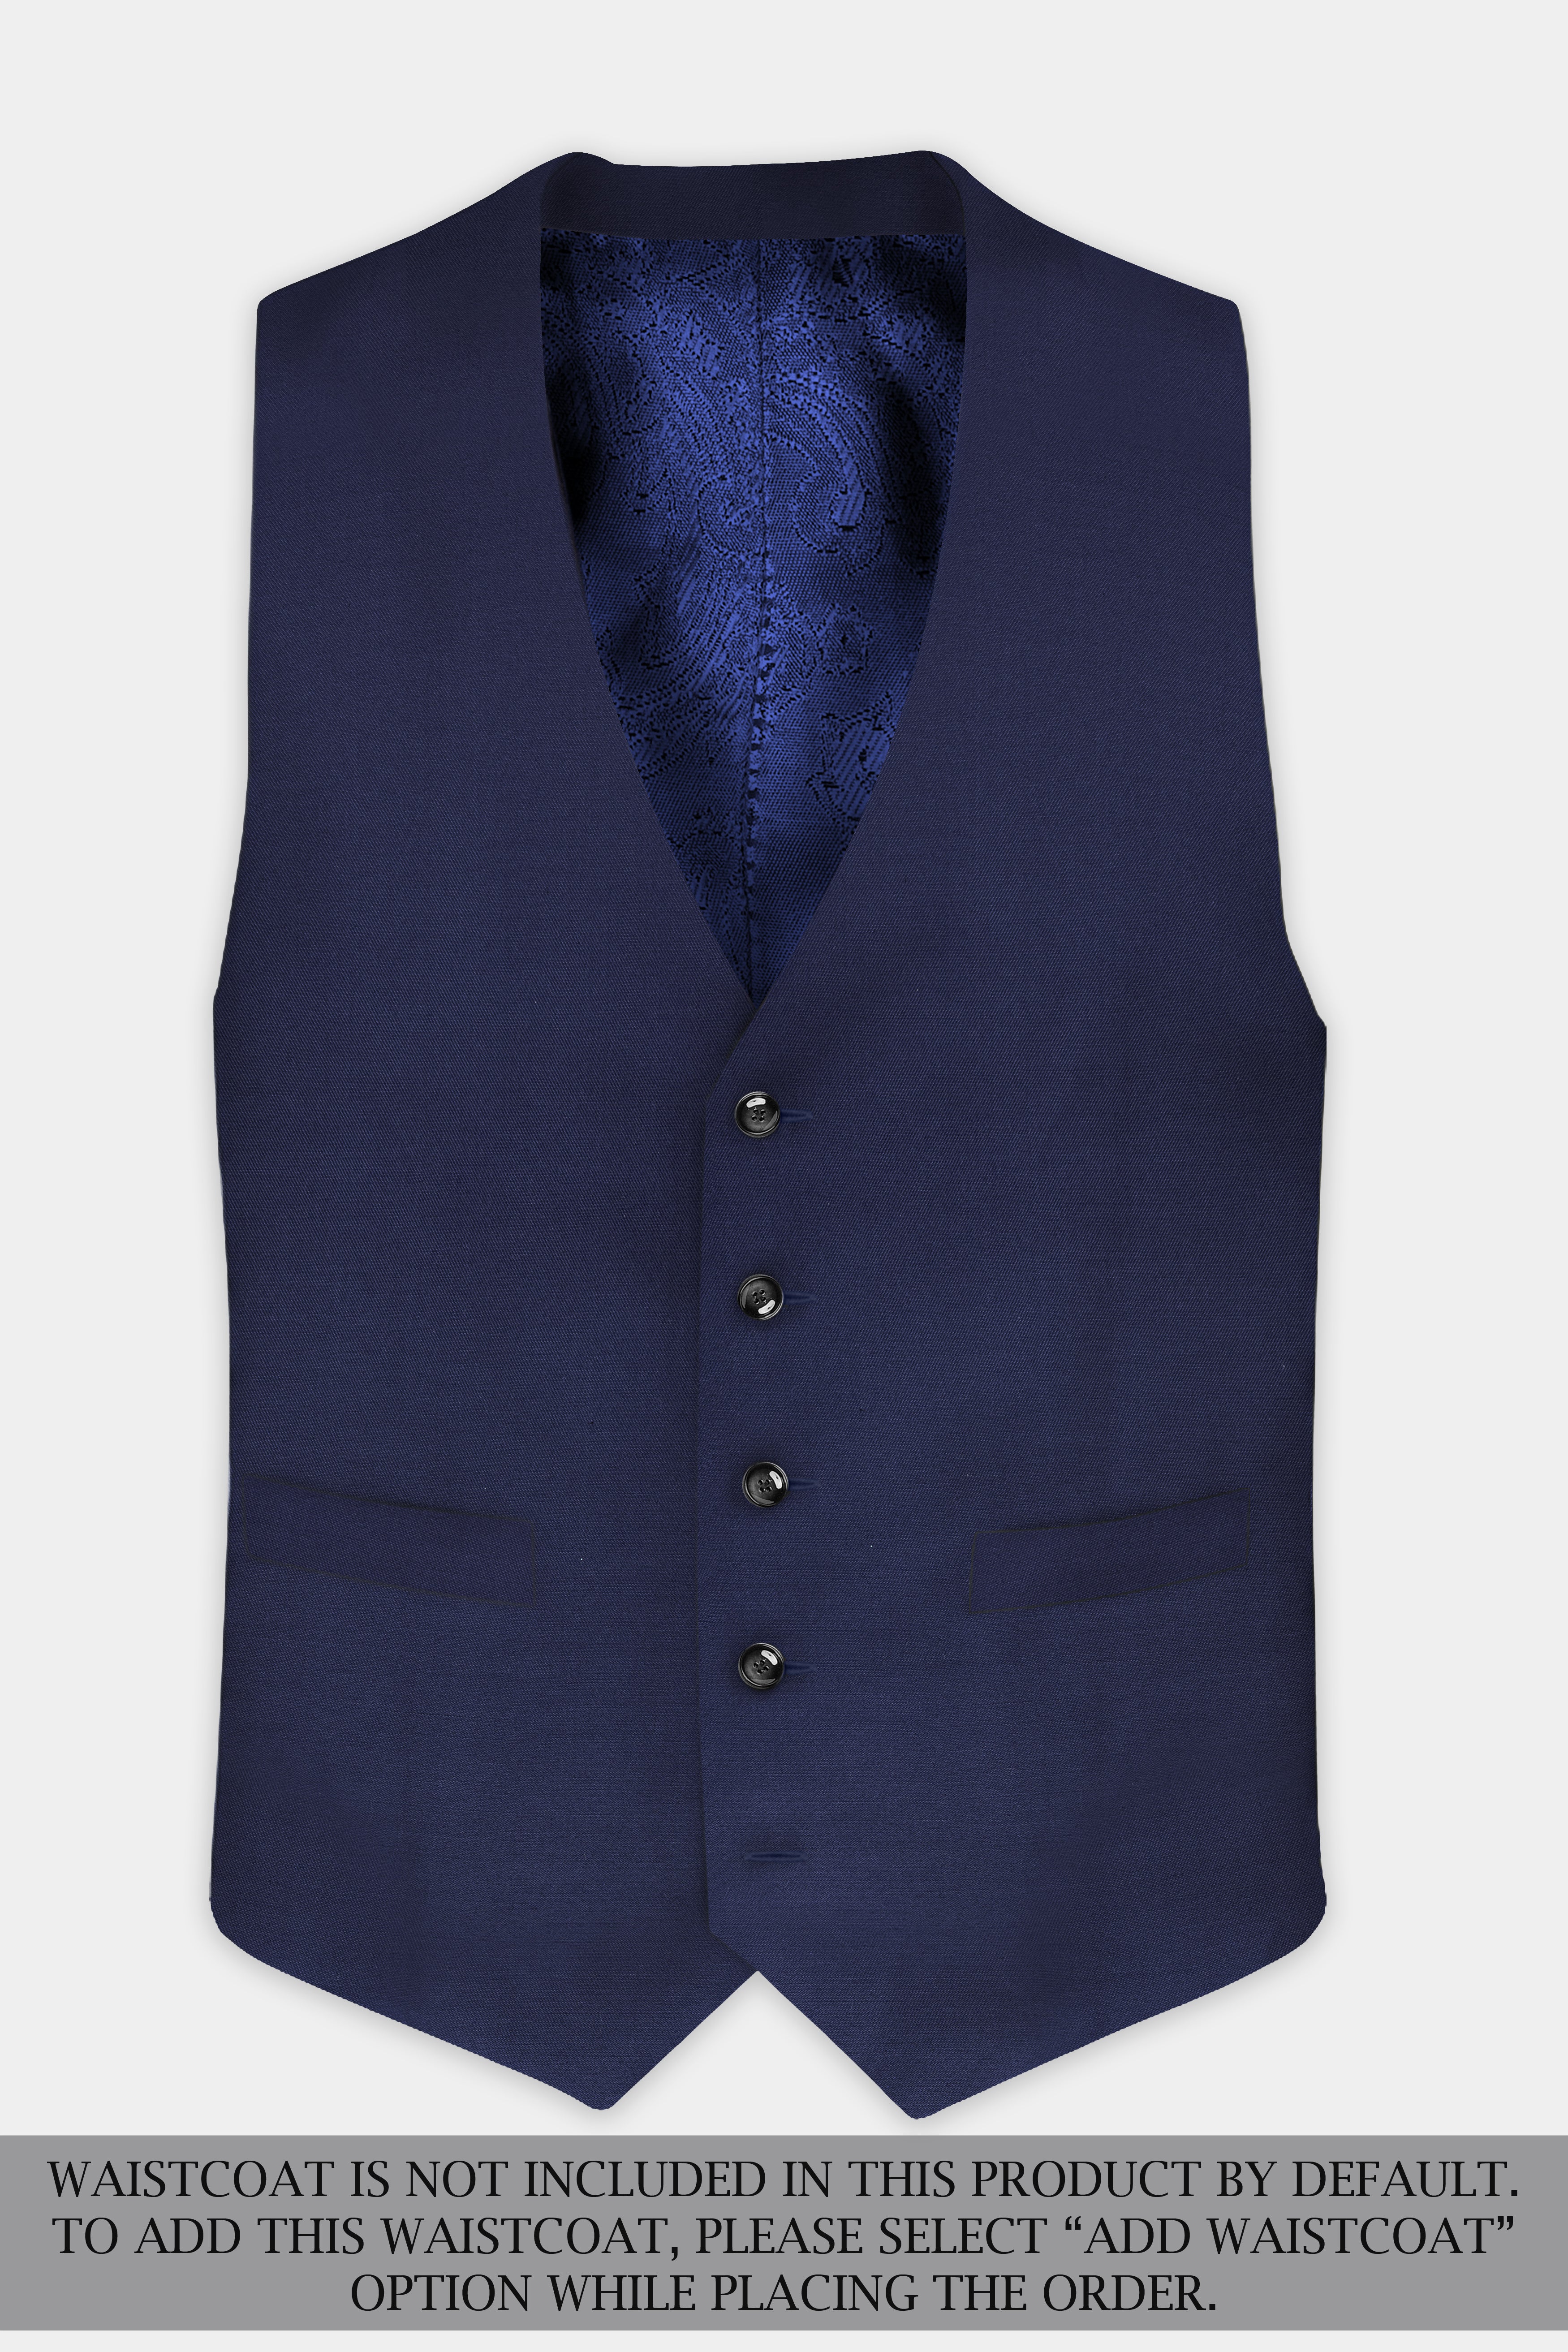 Tealish Blue Plain Solid Wool Blend Double Breasted Suit